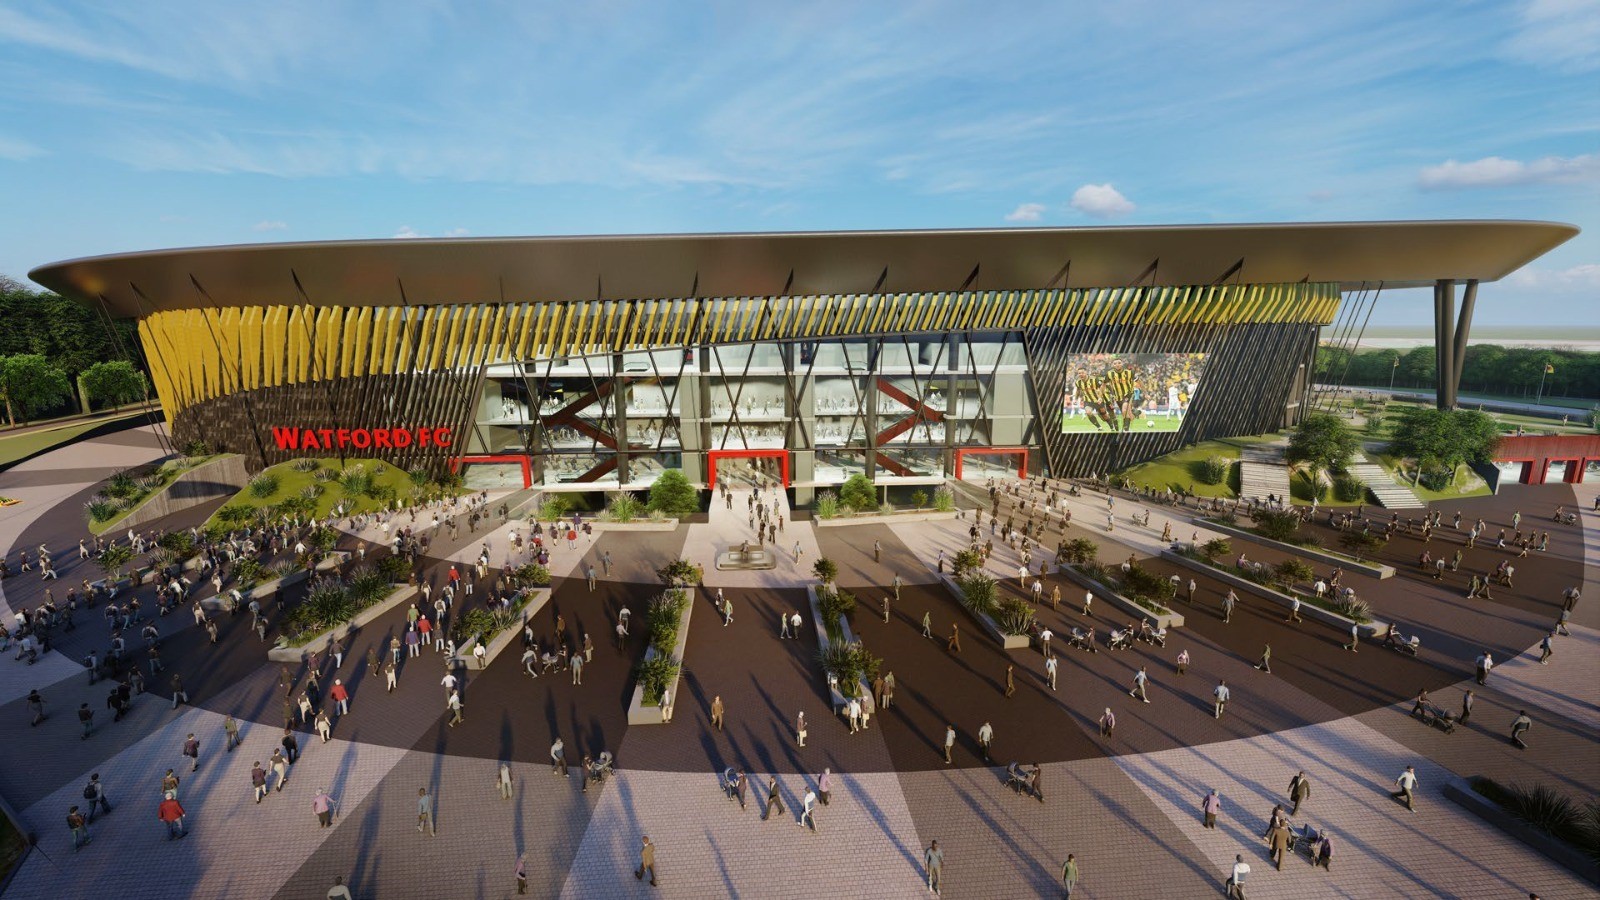 This stadium design, thought to be on the Bushey Hall site, was leaked last March